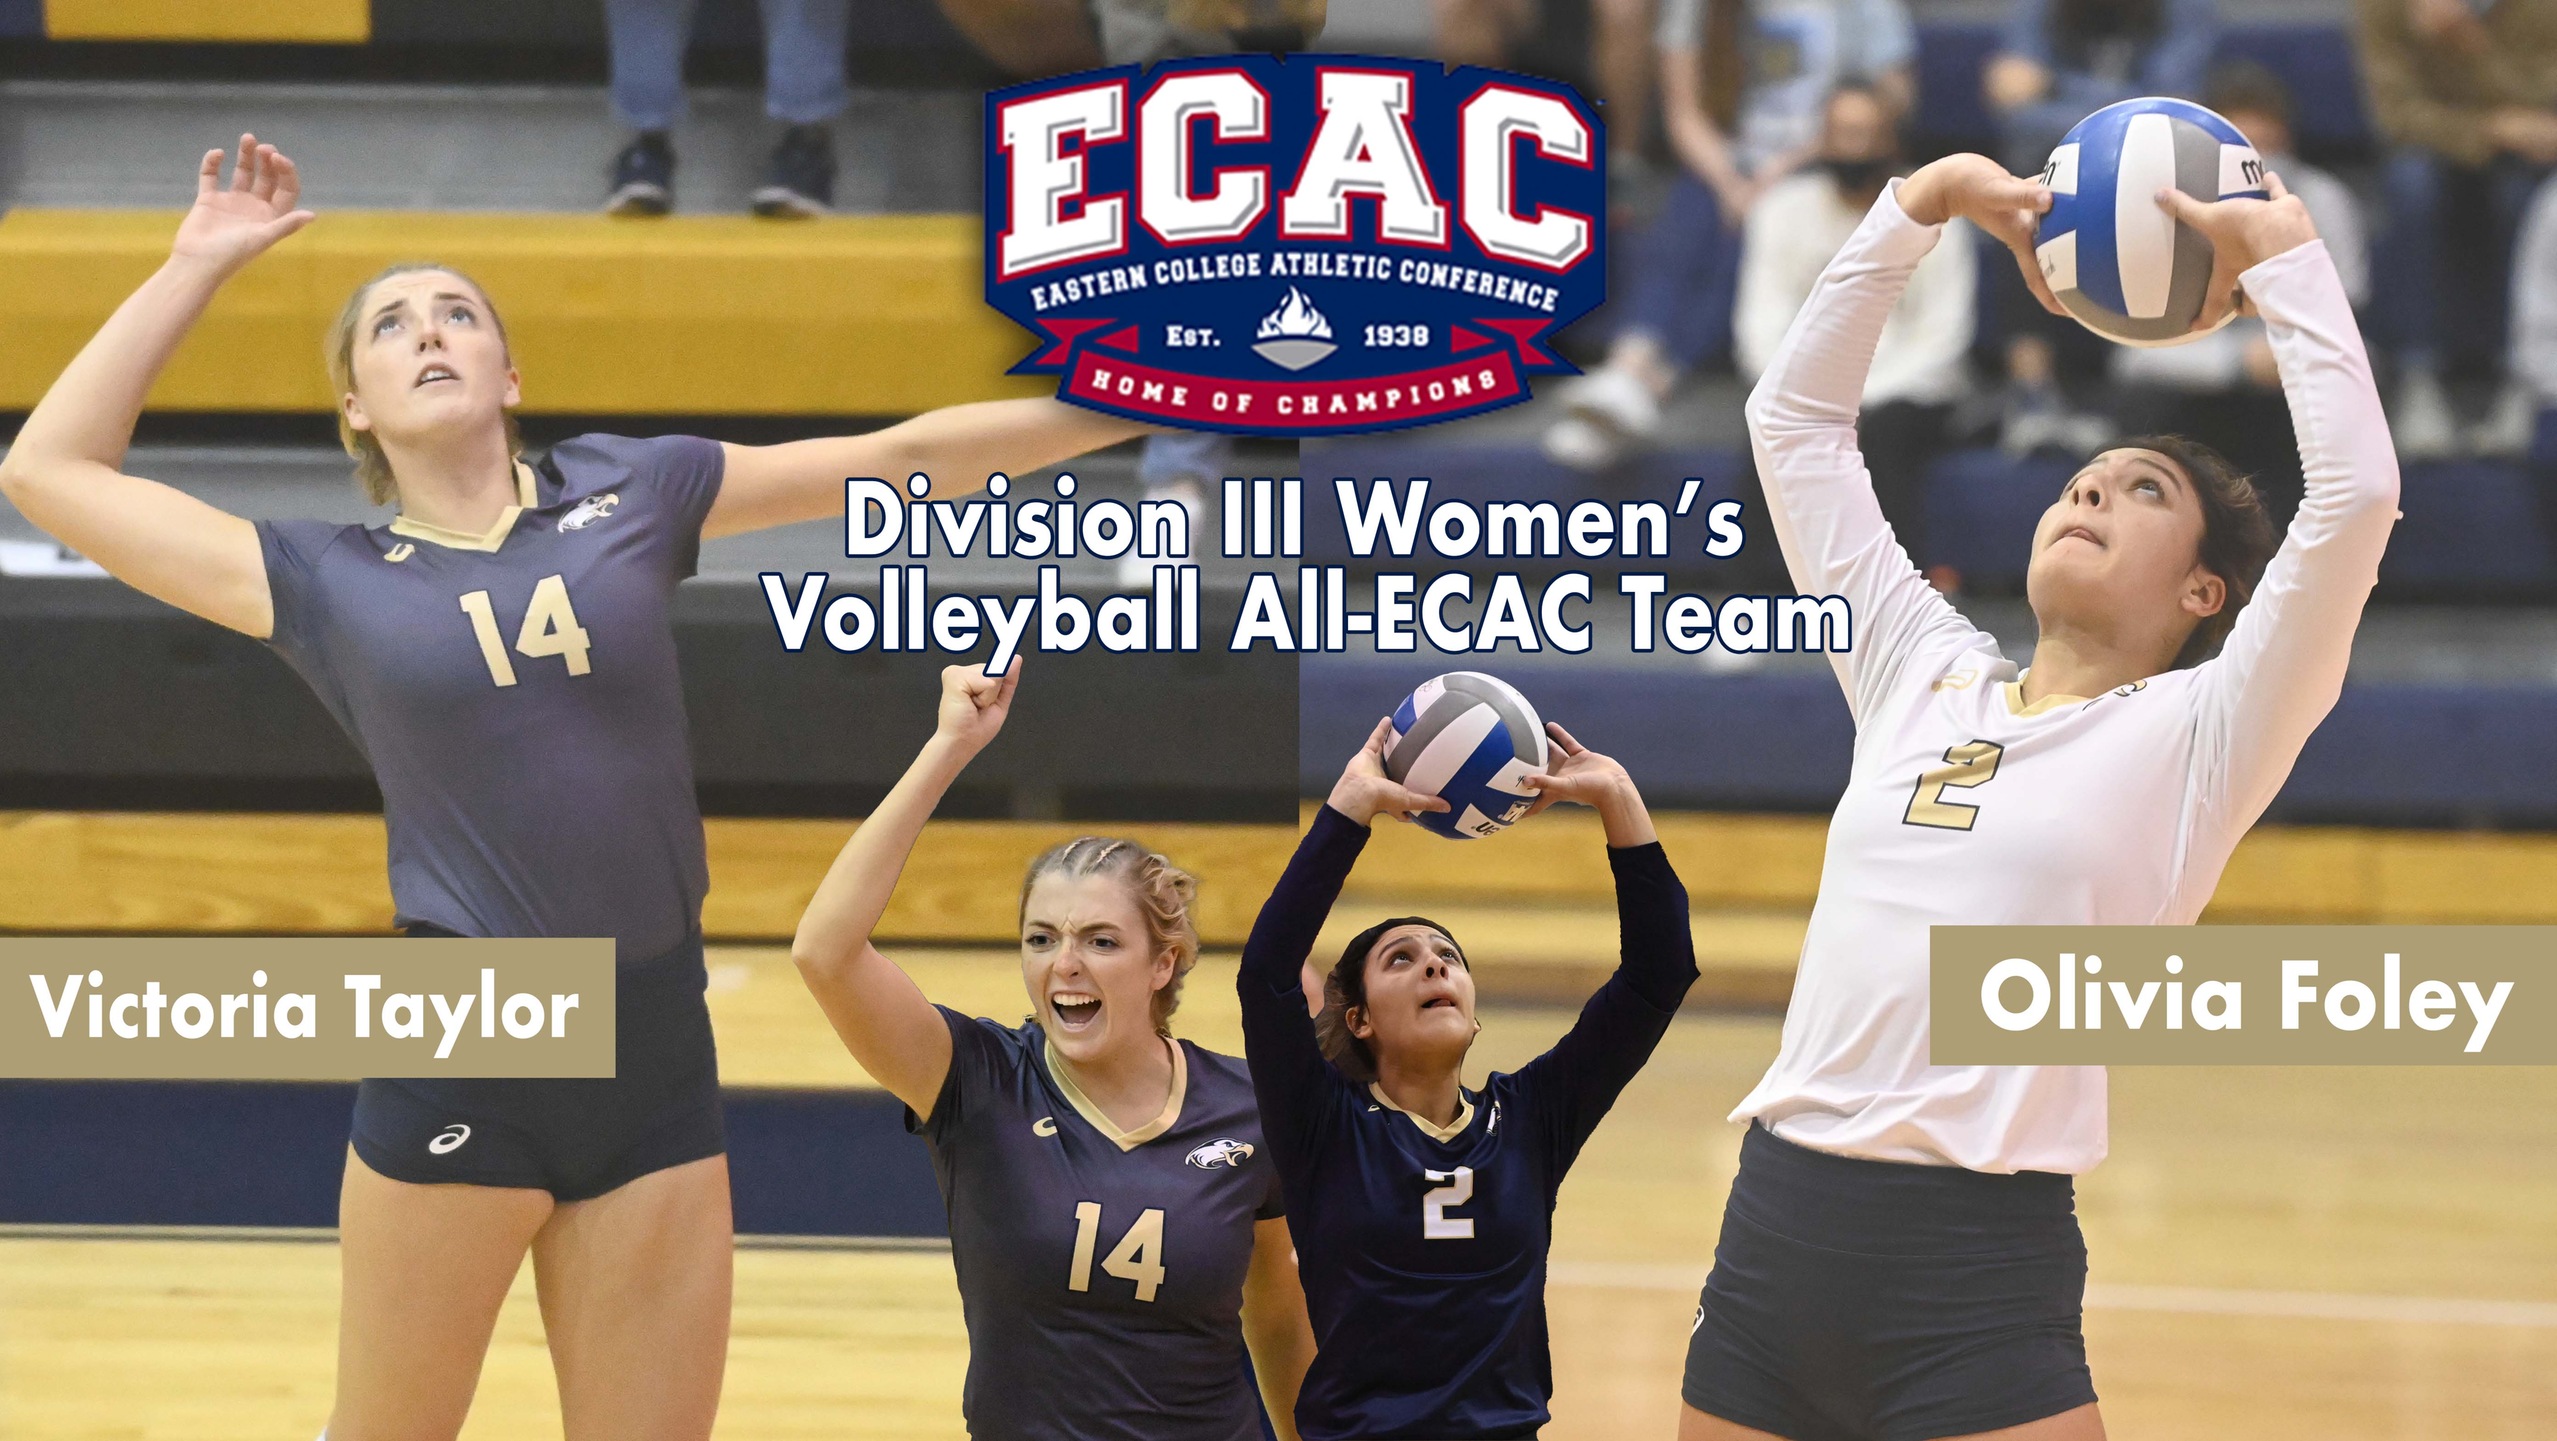 Taylor, Foley Named to ECAC Division III Women’s Volleyball All-ECAC Team